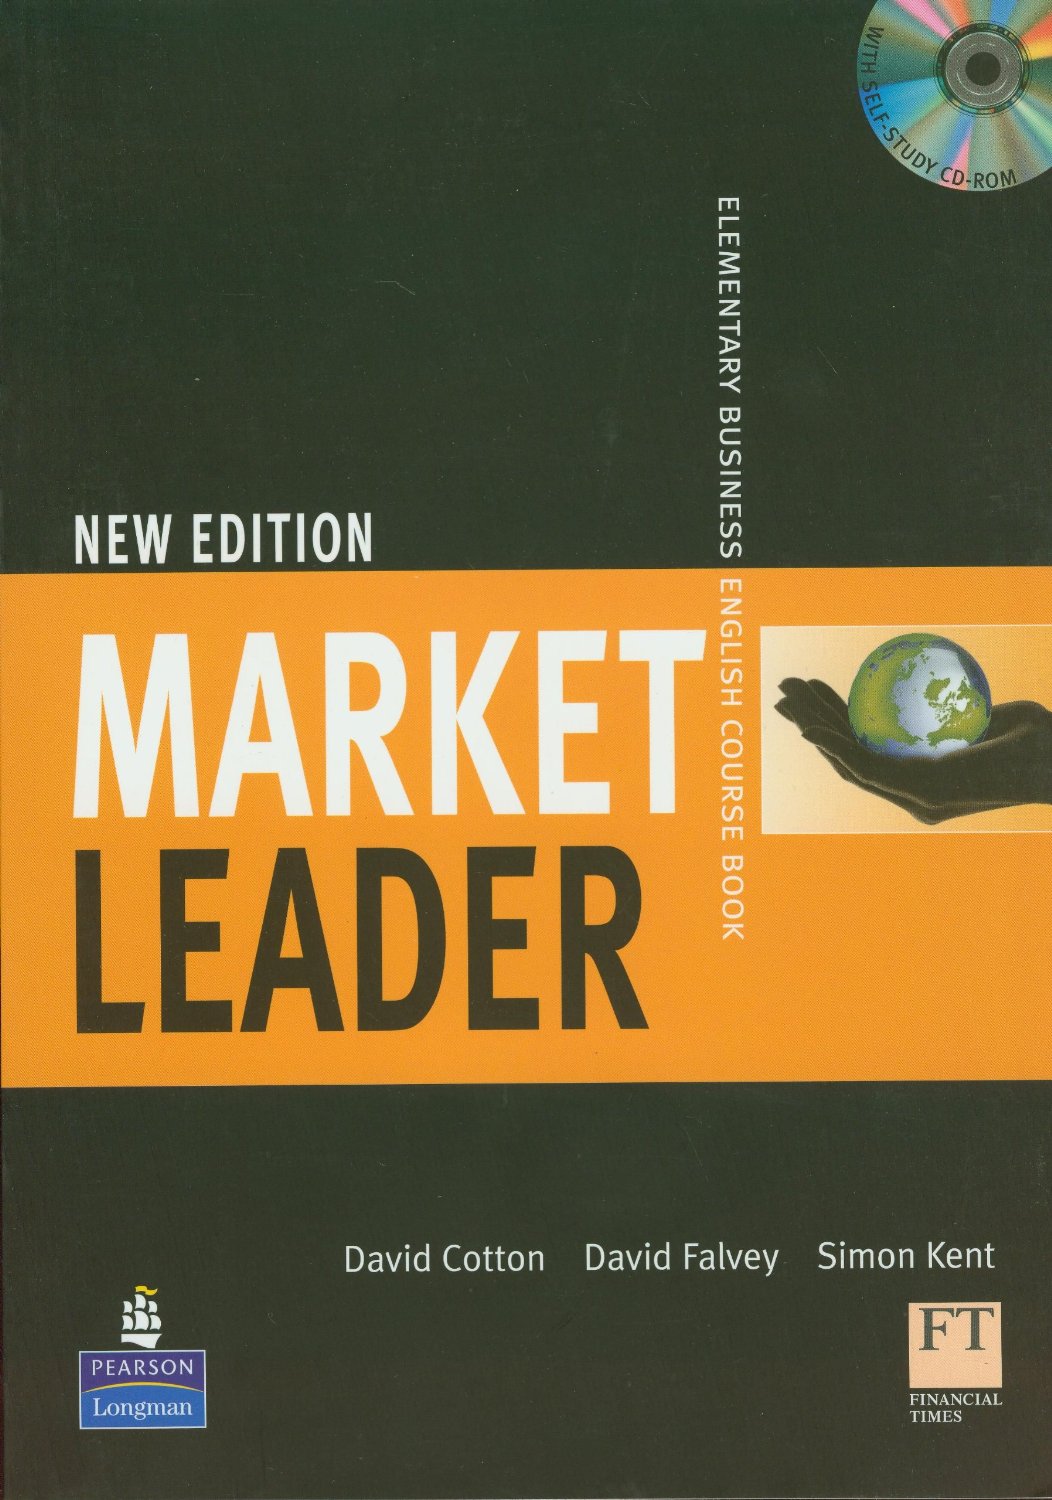 Market Leader Accounting And Finance Pdf